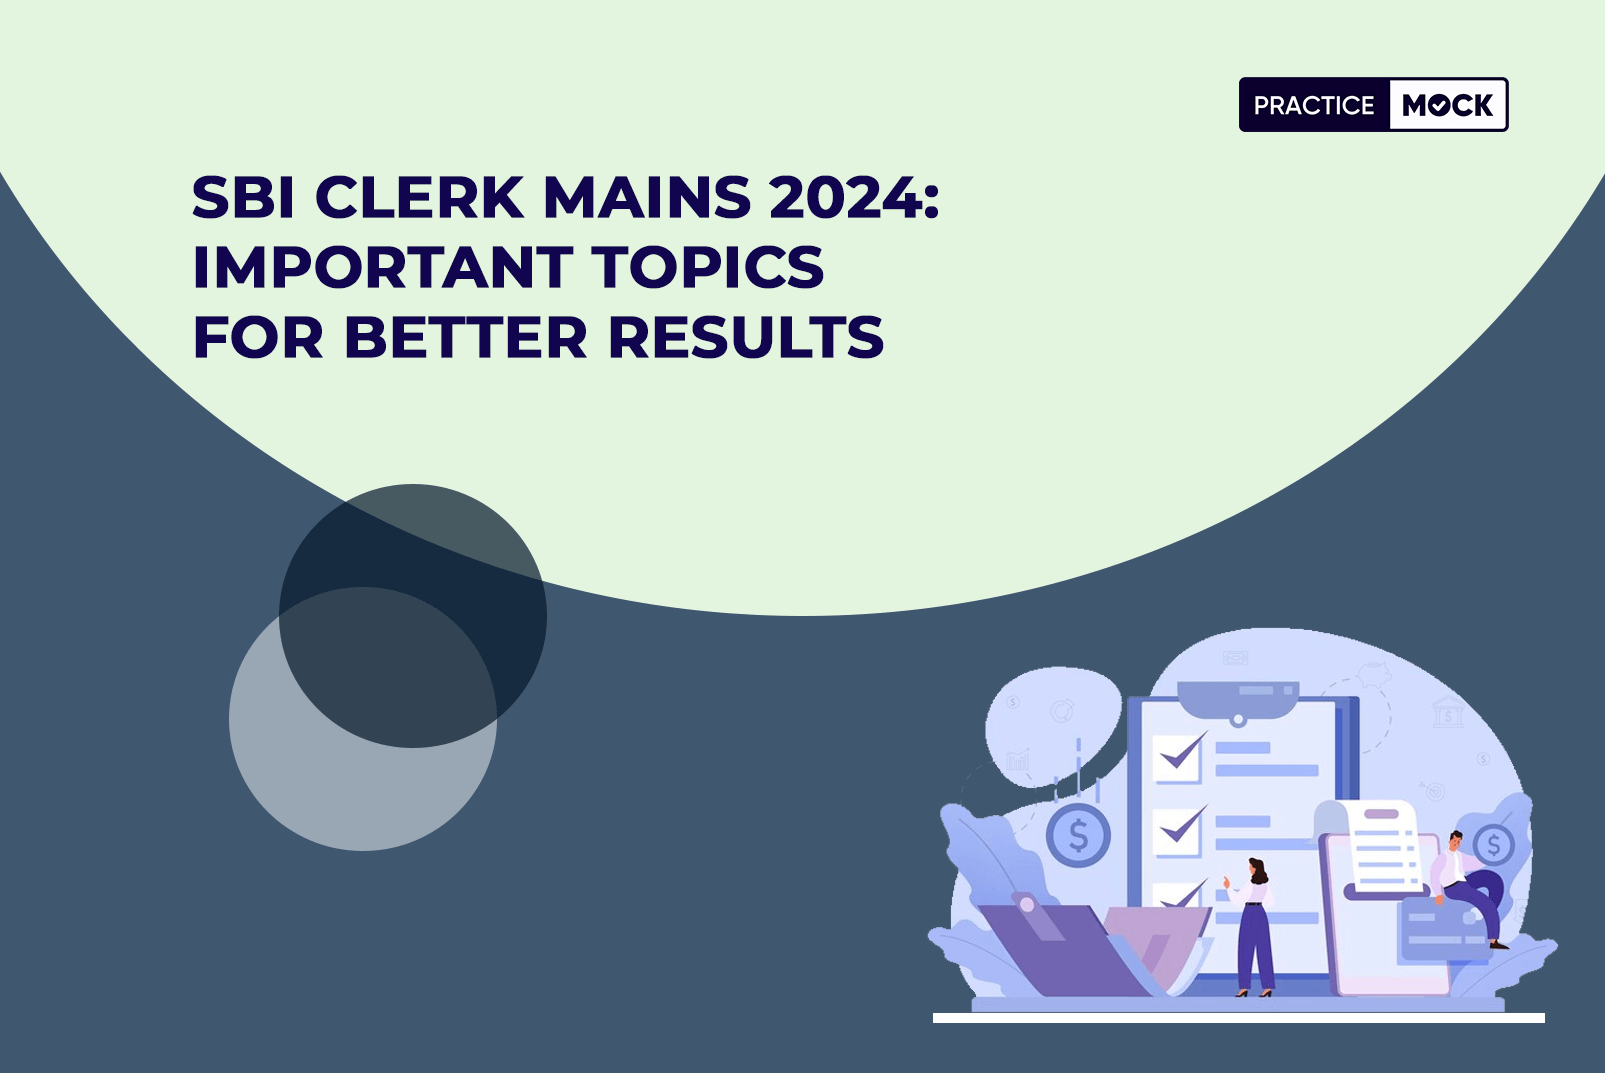 SBI Clerk Mains 2024: Important Topics for Better Results